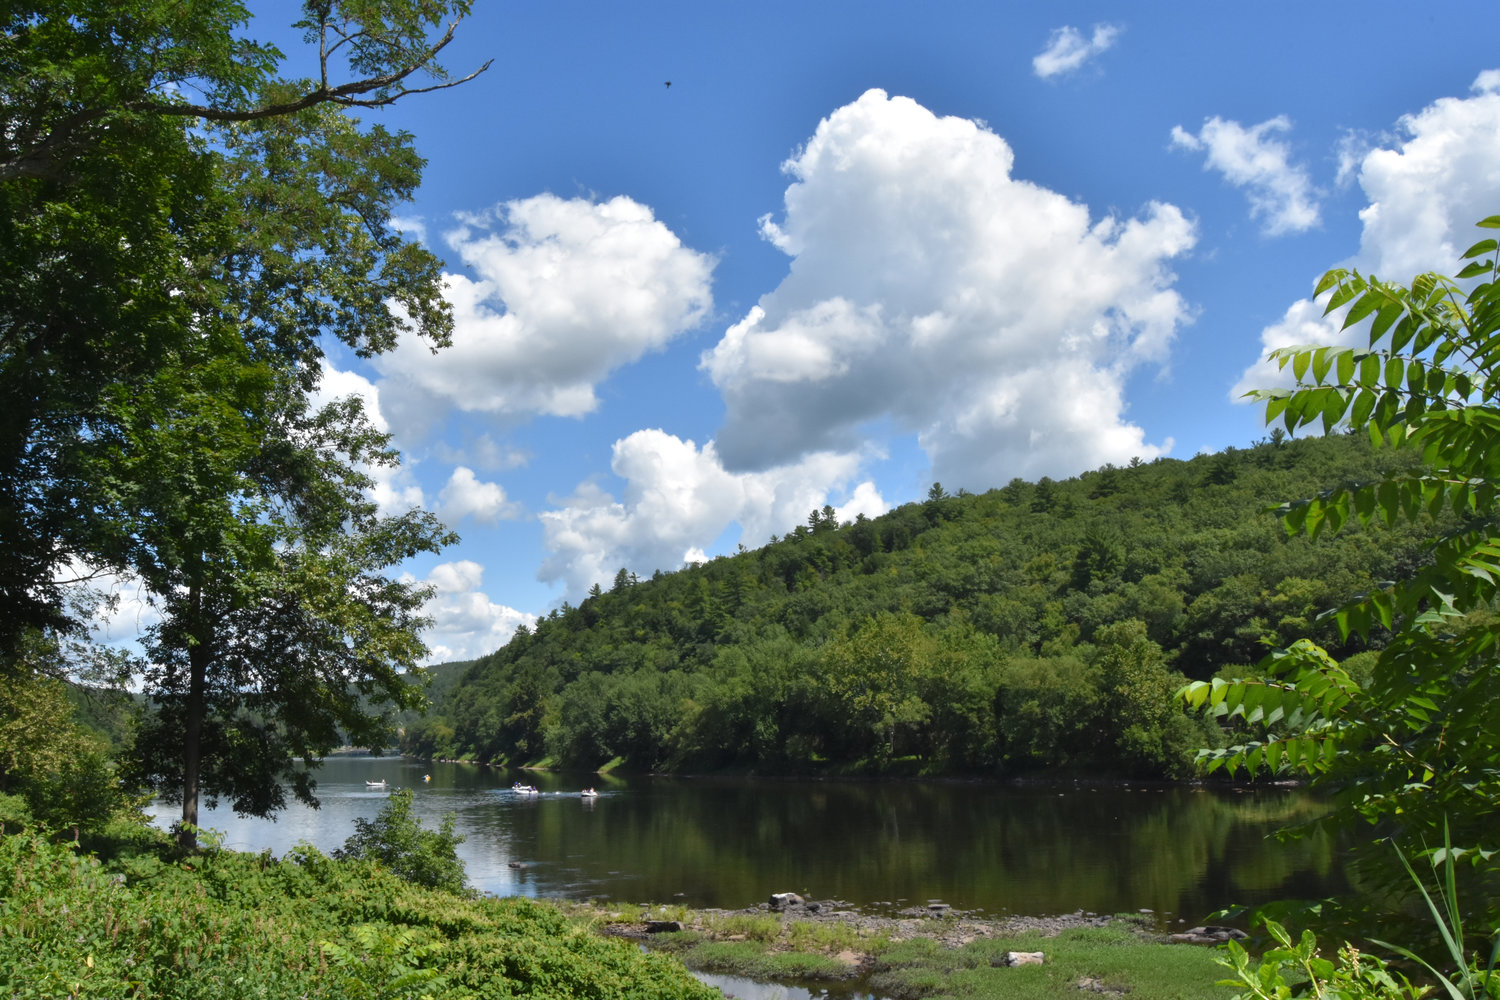 The Upper Delaware River while it looks tranquil has strong undercurrents, sharp dropoffs and slippery rocks. Wearing a lifejacket and secure foot coverings are essential to recreate safely.